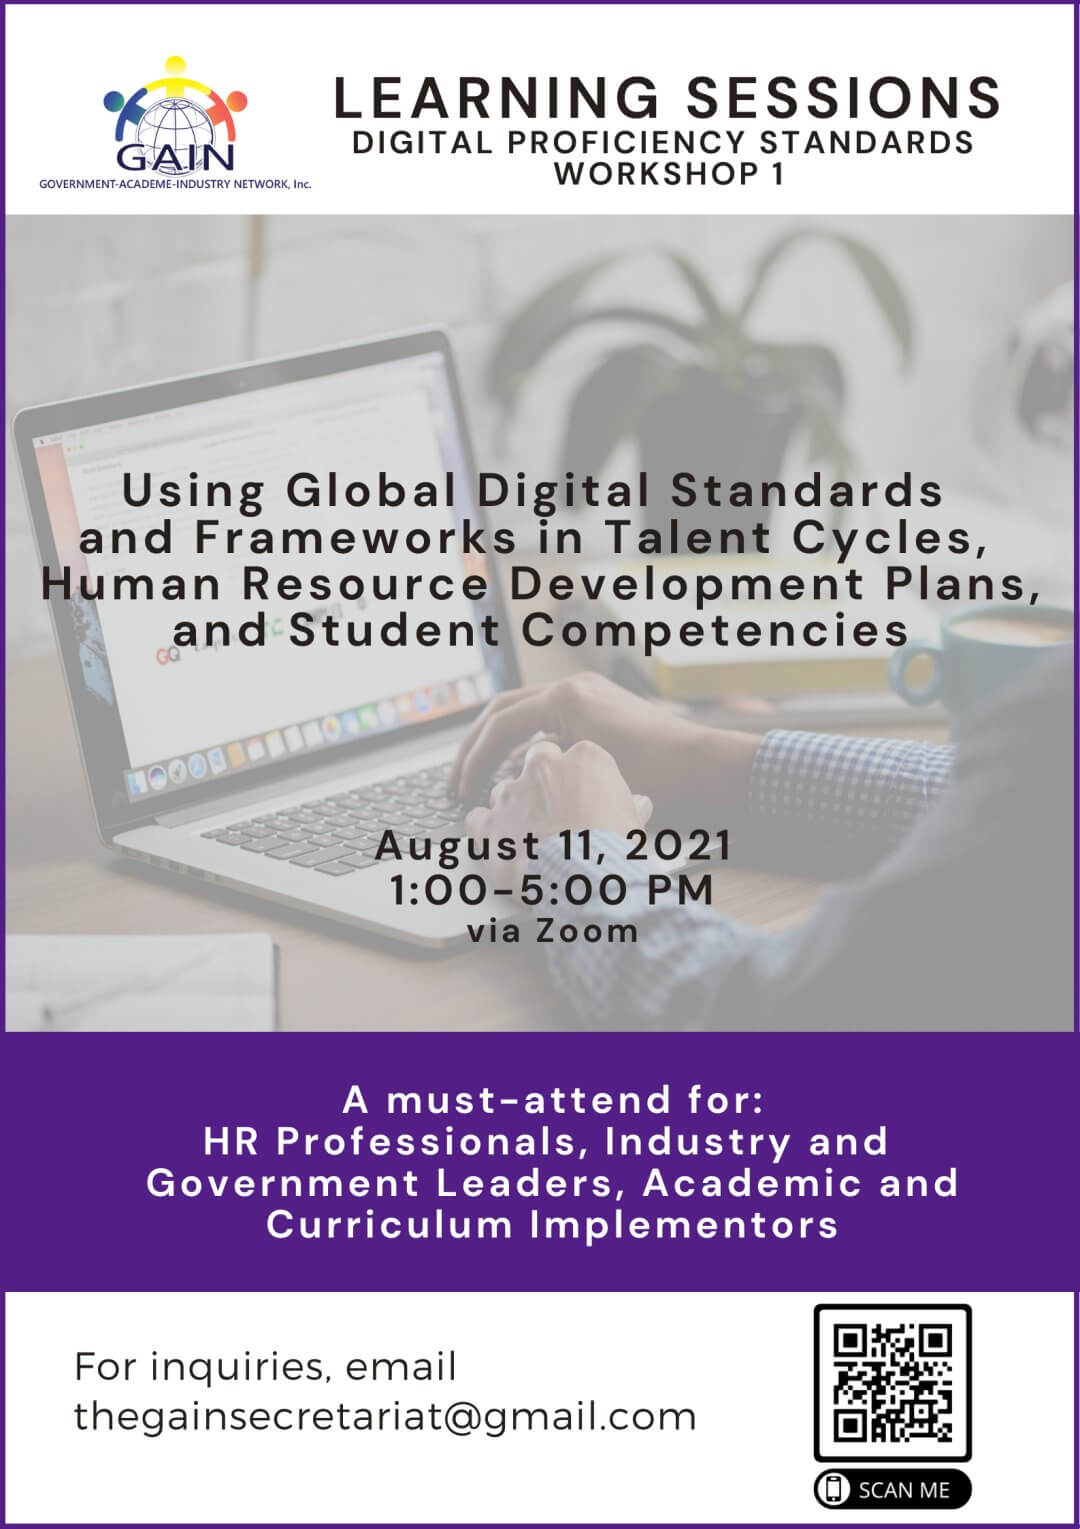 GAIN Learning Session: Using Global Digital Standards and Frameworks in Talent Cycles, Human Resource Development Plans, and Student Competencies